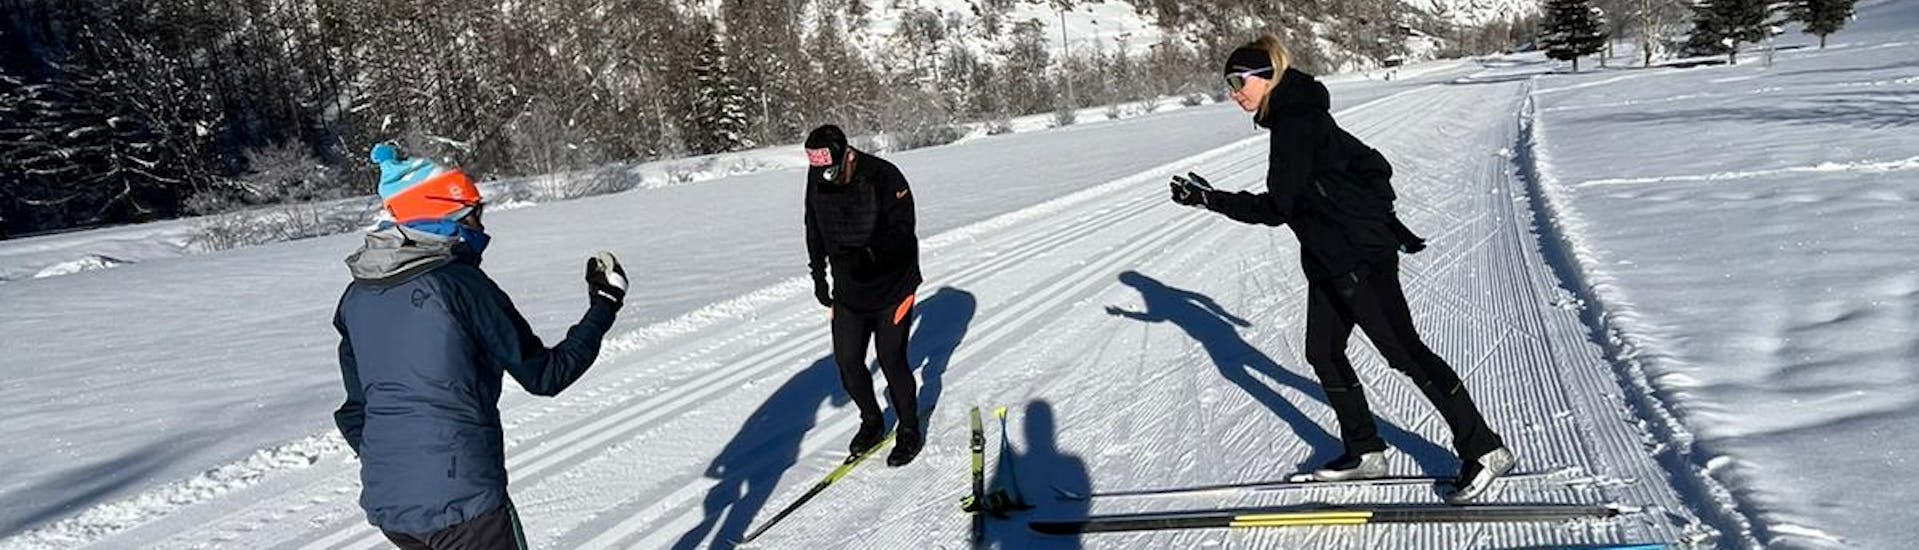 Private Cross Country Skiing Lessons for All Levels.